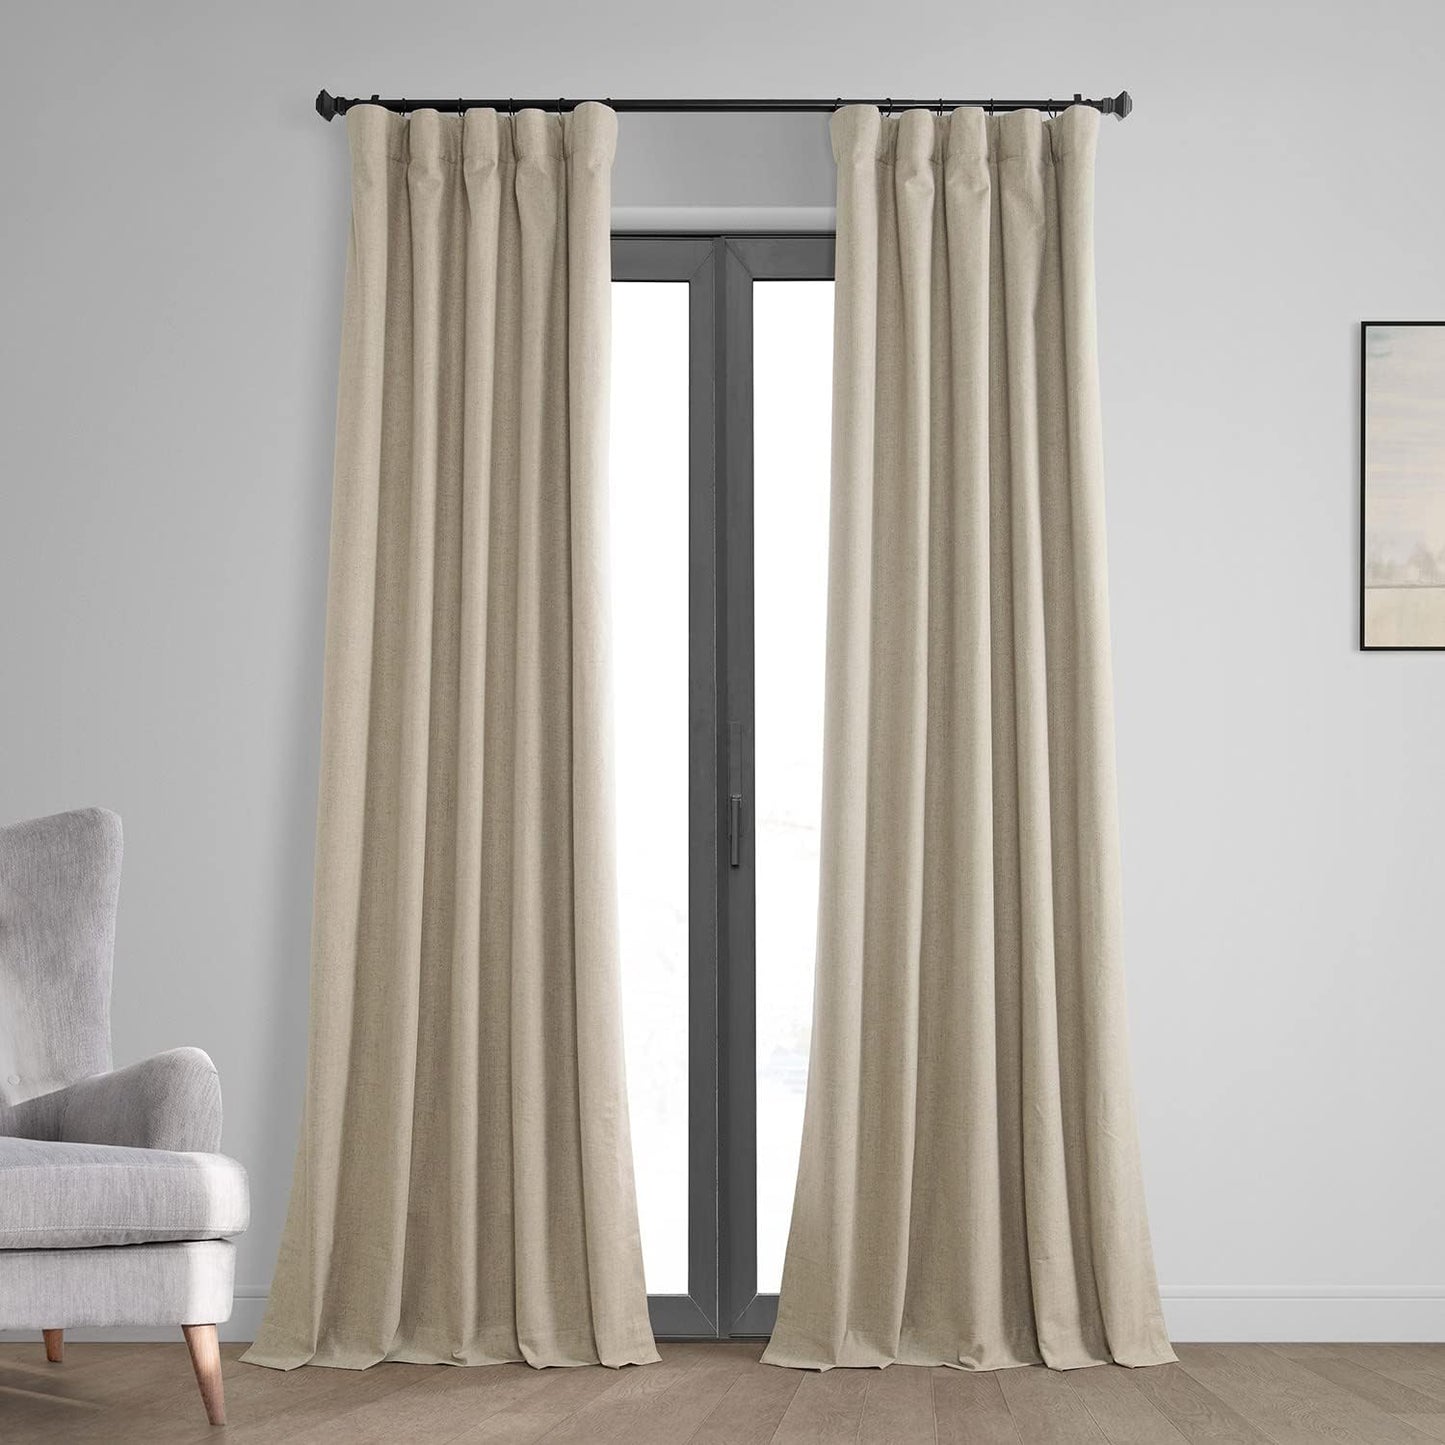 HPD Half Price Drapes Vintage Blackout Curtains for Bedroom - 96 Inches Long Thermal Cross Linen Weave Full Light Blocking 1 Panel Blackout Curtain, (50W X 96L), Millennial Grey  Exclusive Fabrics & Furnishings Light Tan 50W X 108L 